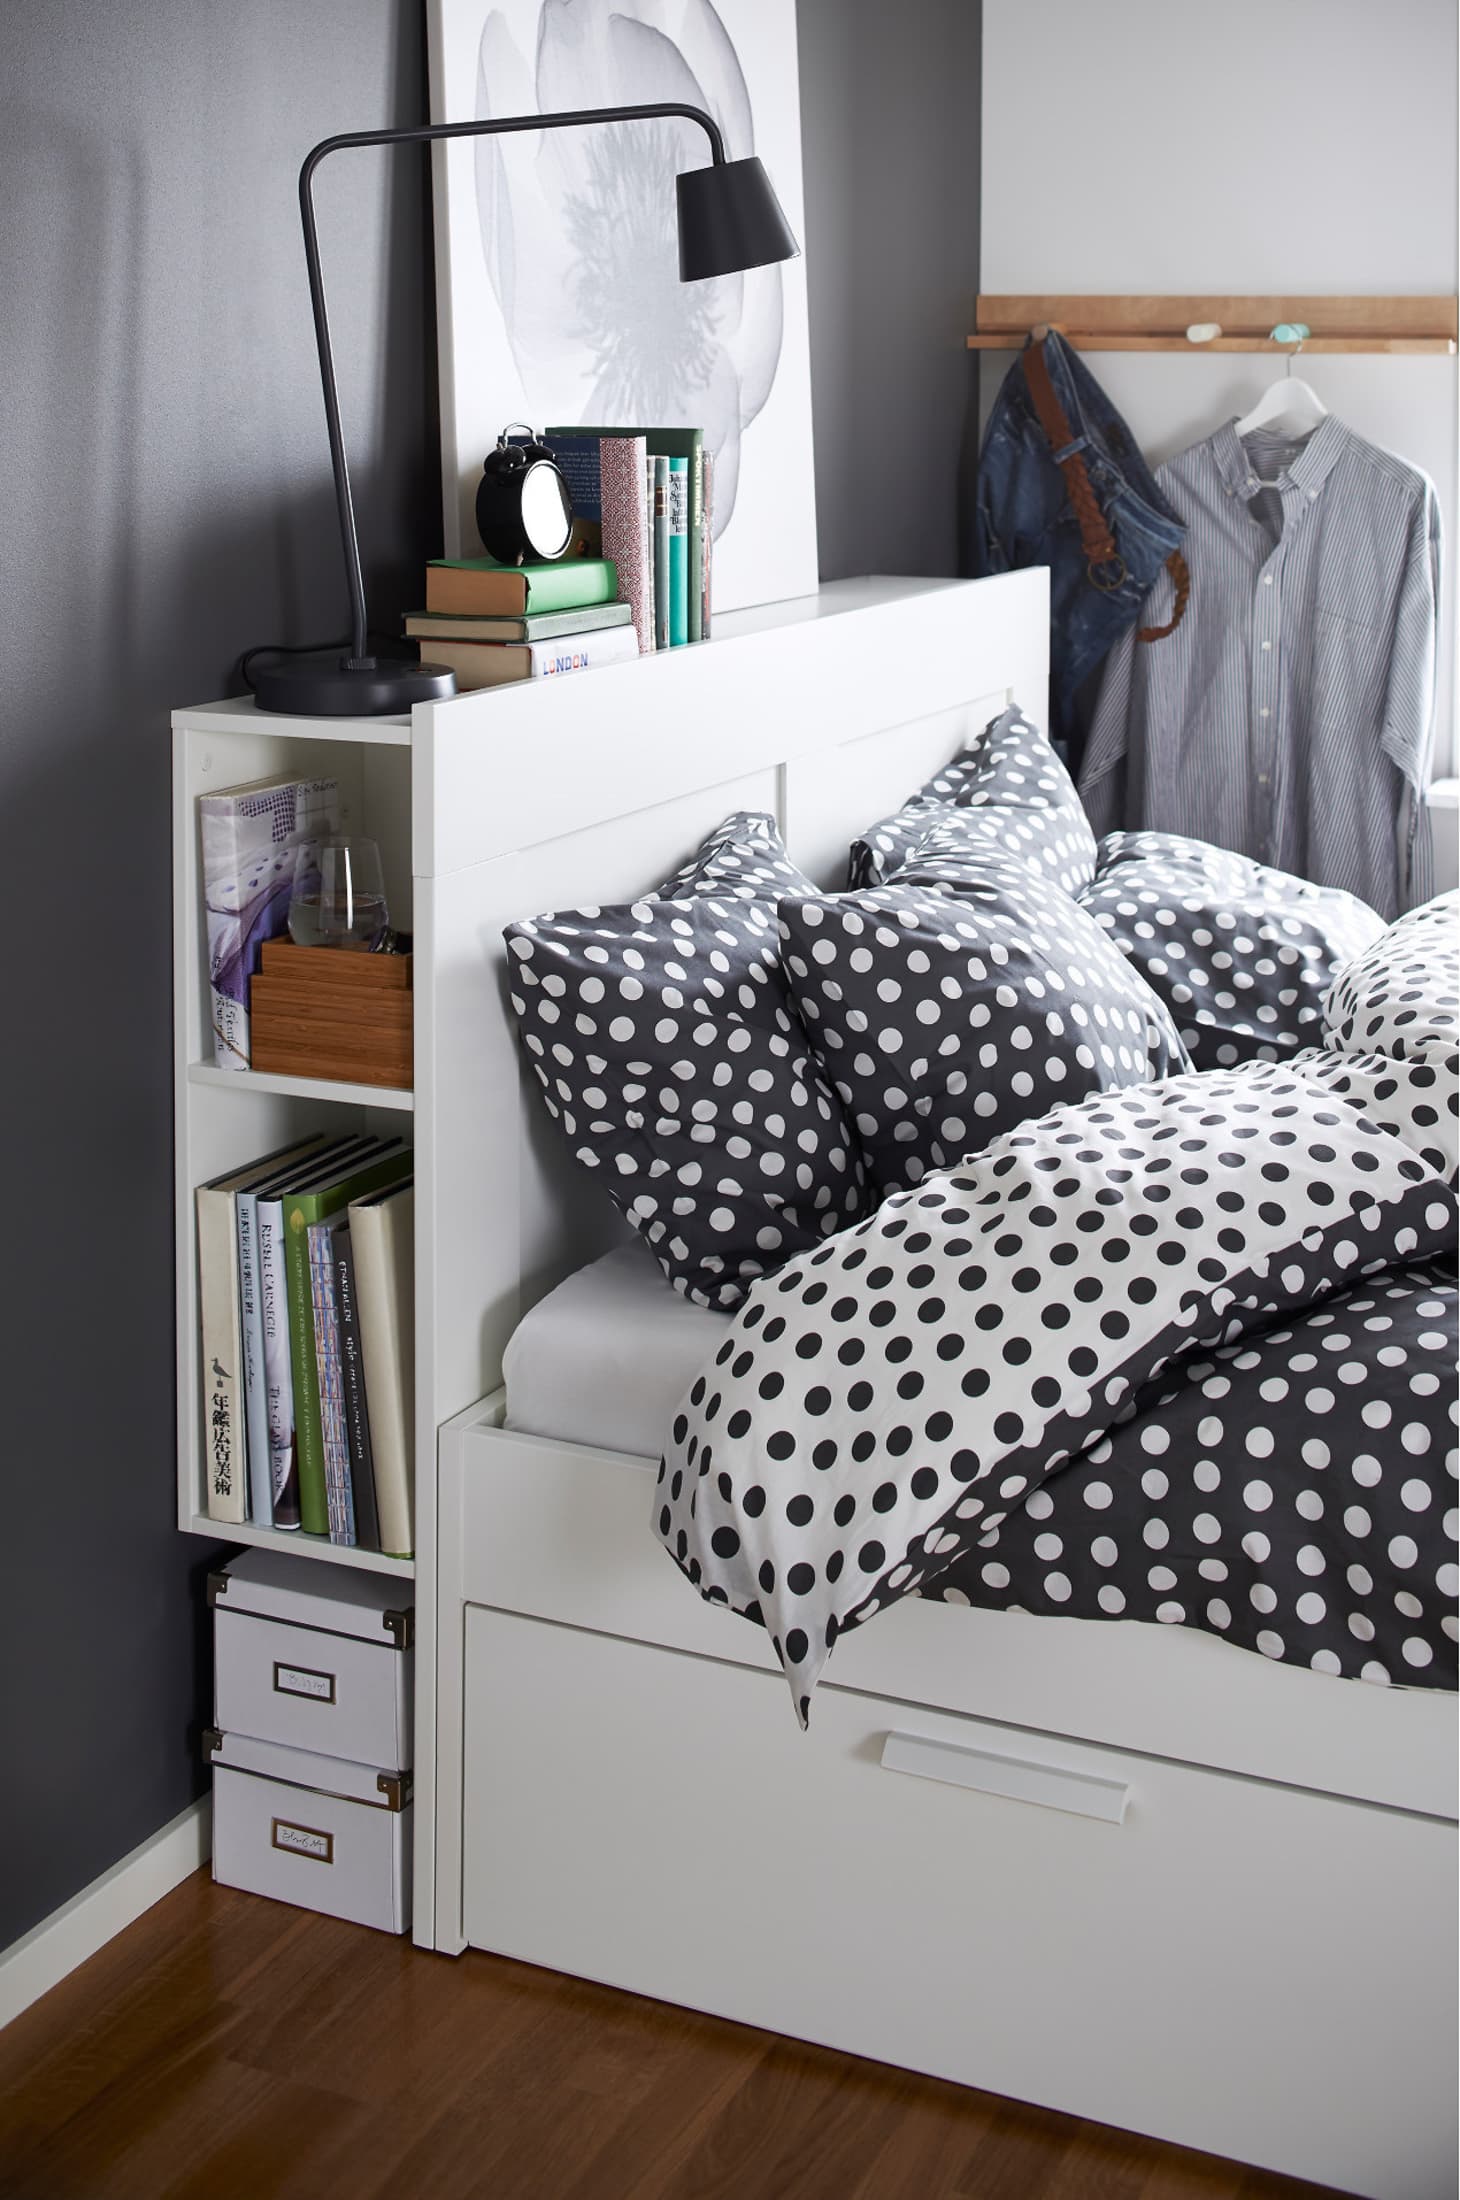 New Ikea Bedroom Sets for Simple Design